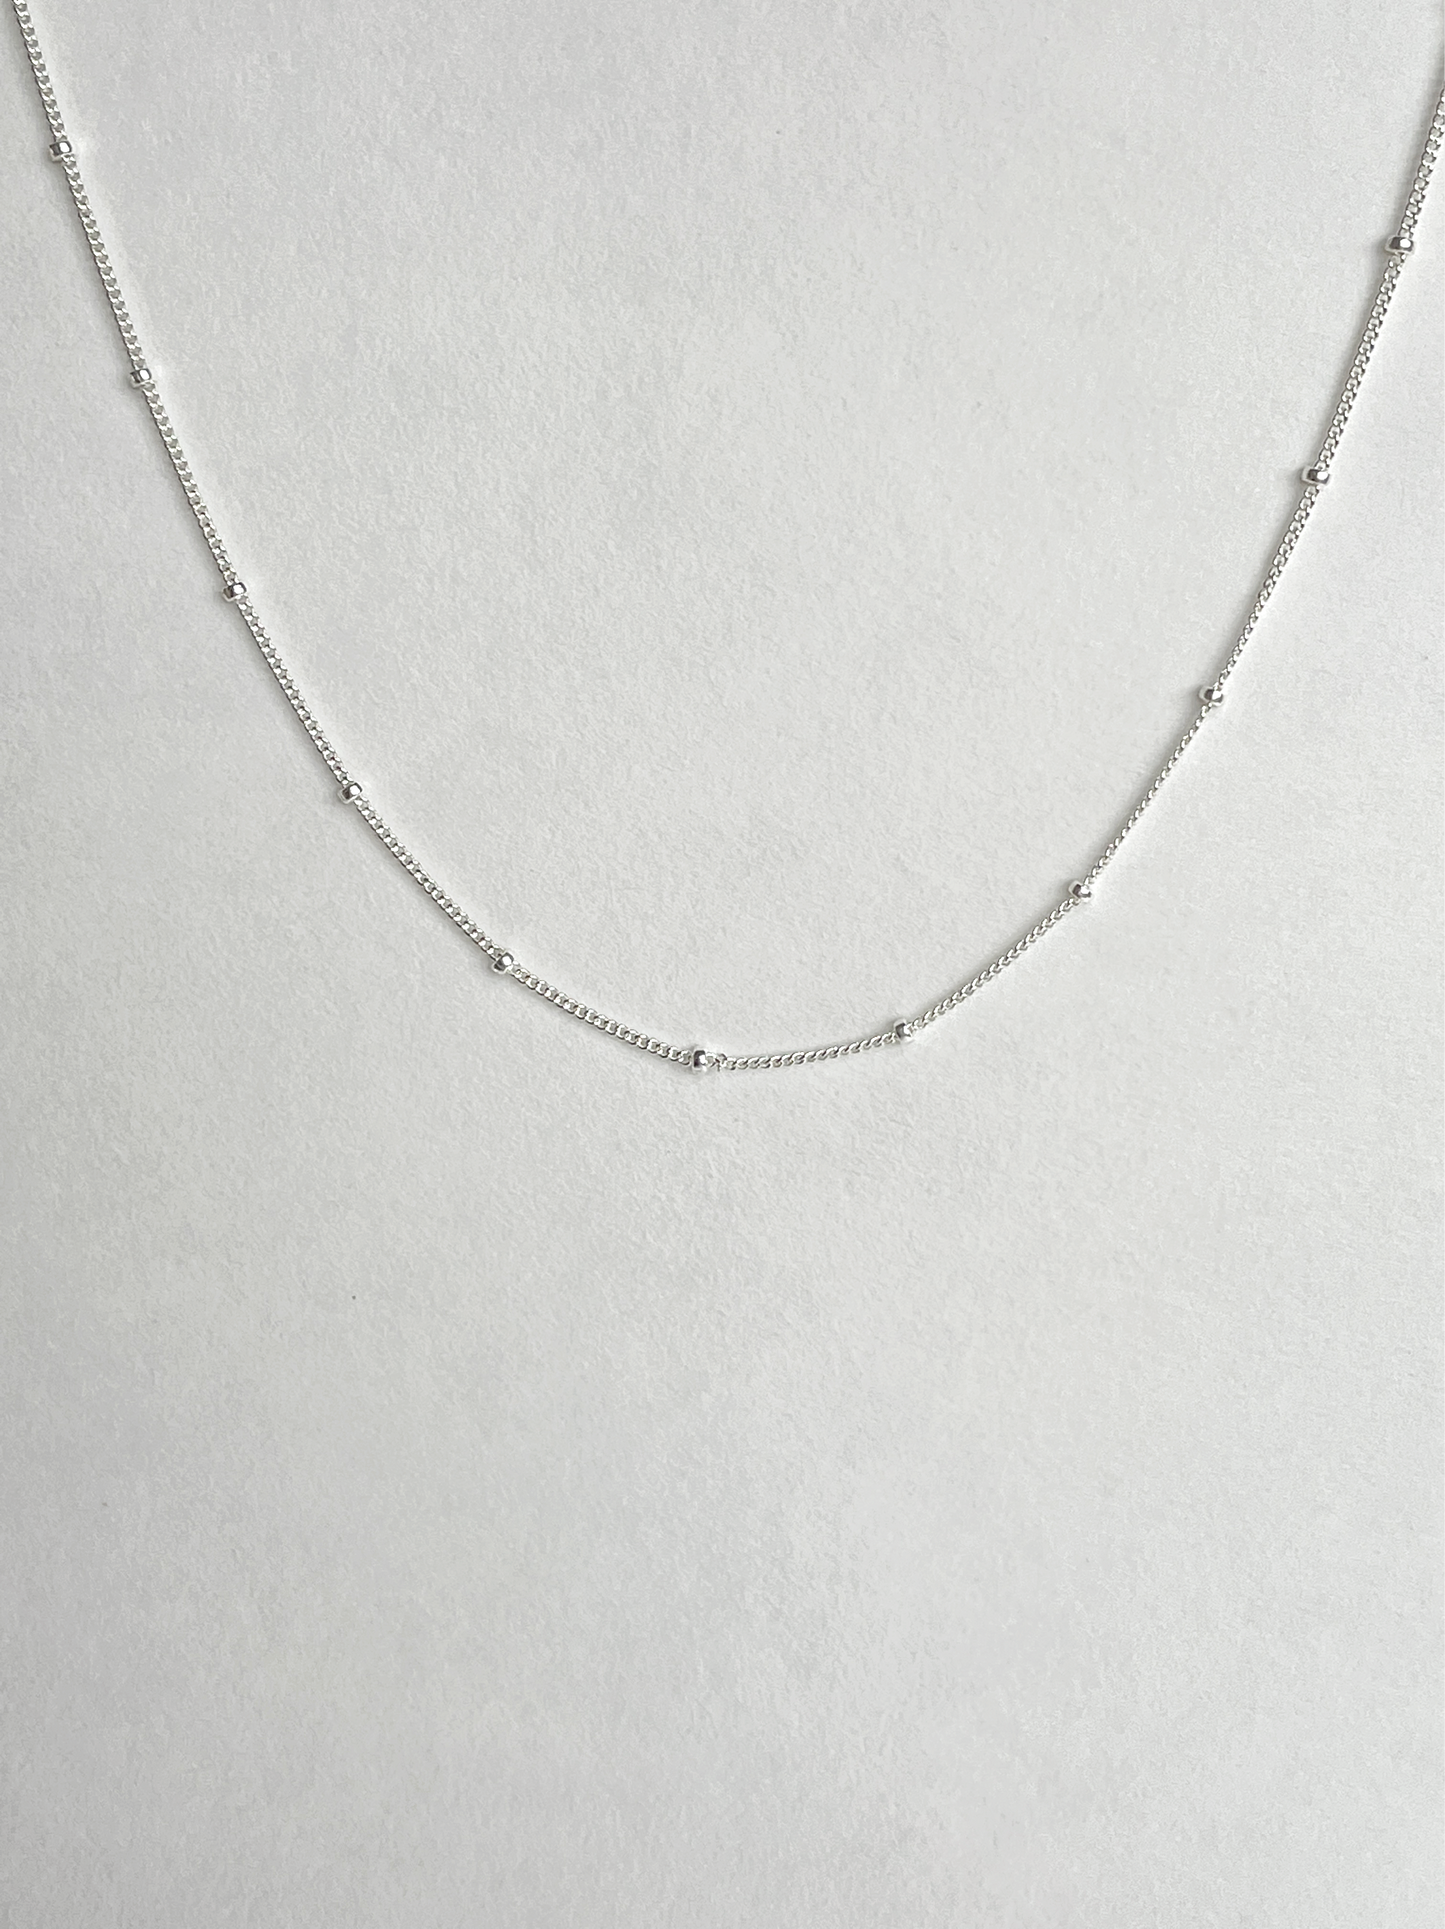 Silver Whisper Necklace